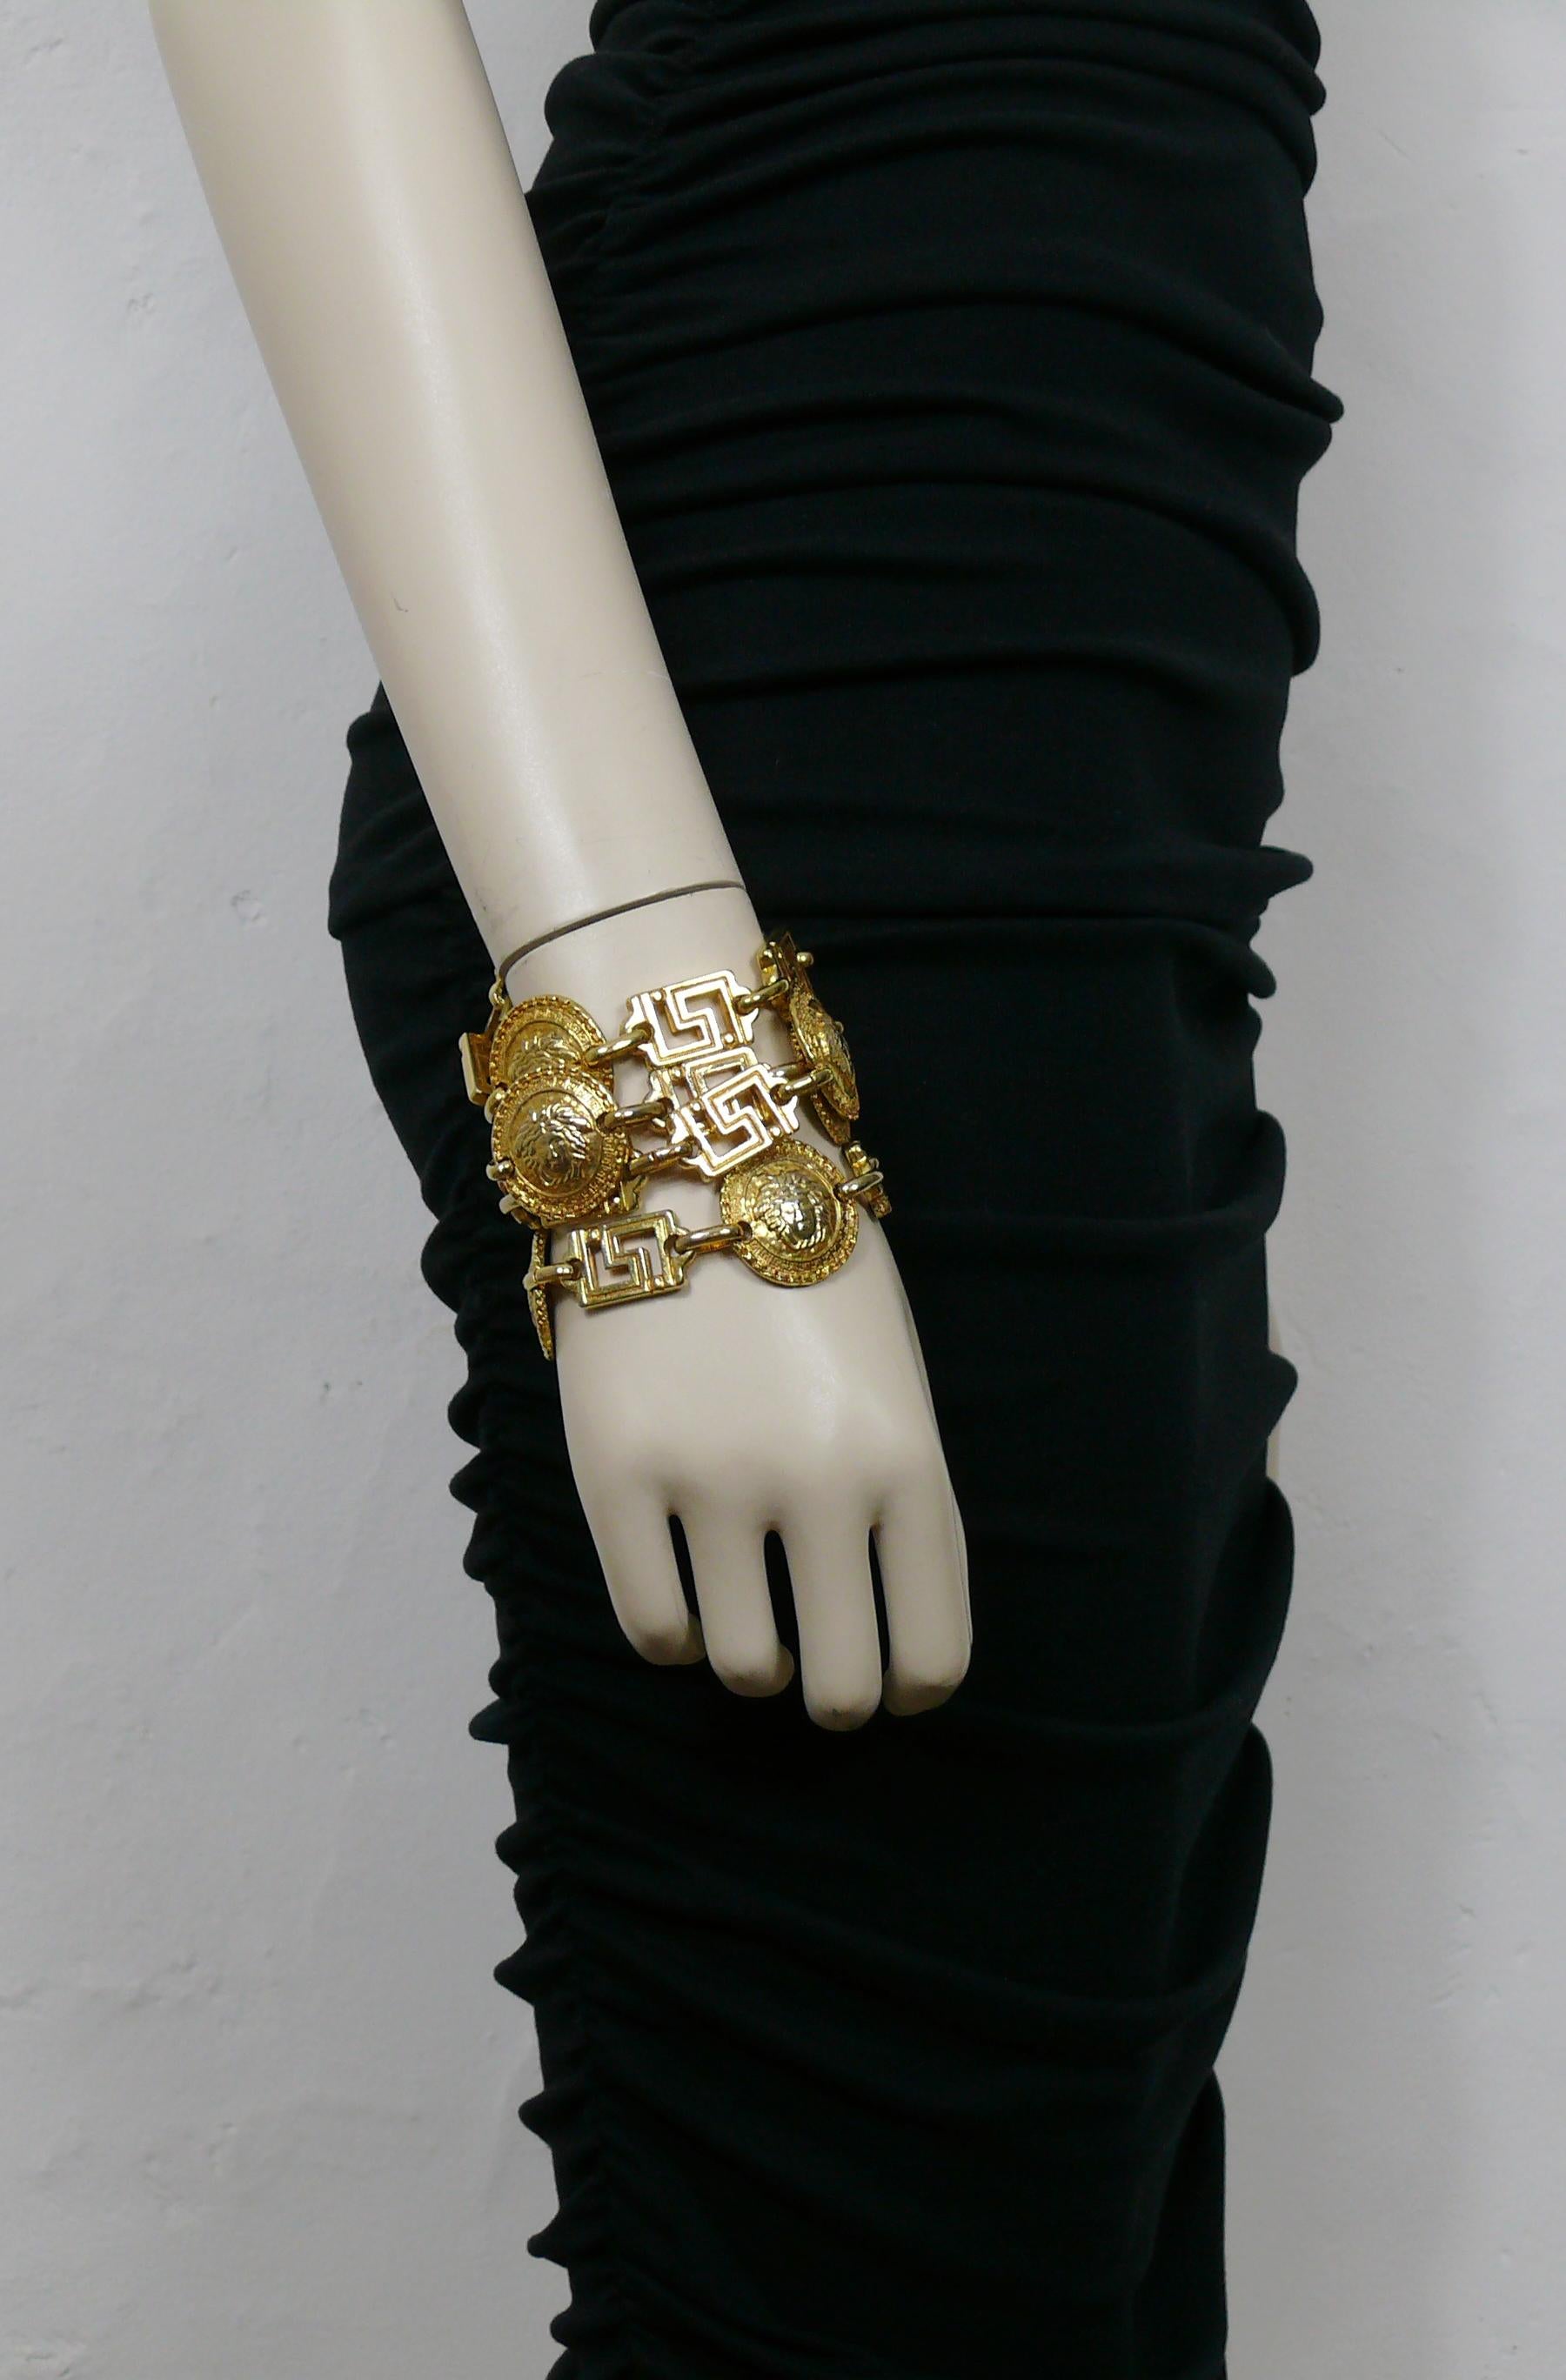 GIANNI VERSACE vintage iconic gold toned four-strand layered cuff bracelet featuring greek key links and round Medusa coins.

Embossed GIANNI VERSACE Made in Italy.

Indicative measurements : length approx. 19.5 cm (7.68 inches) / width approx. 8.2